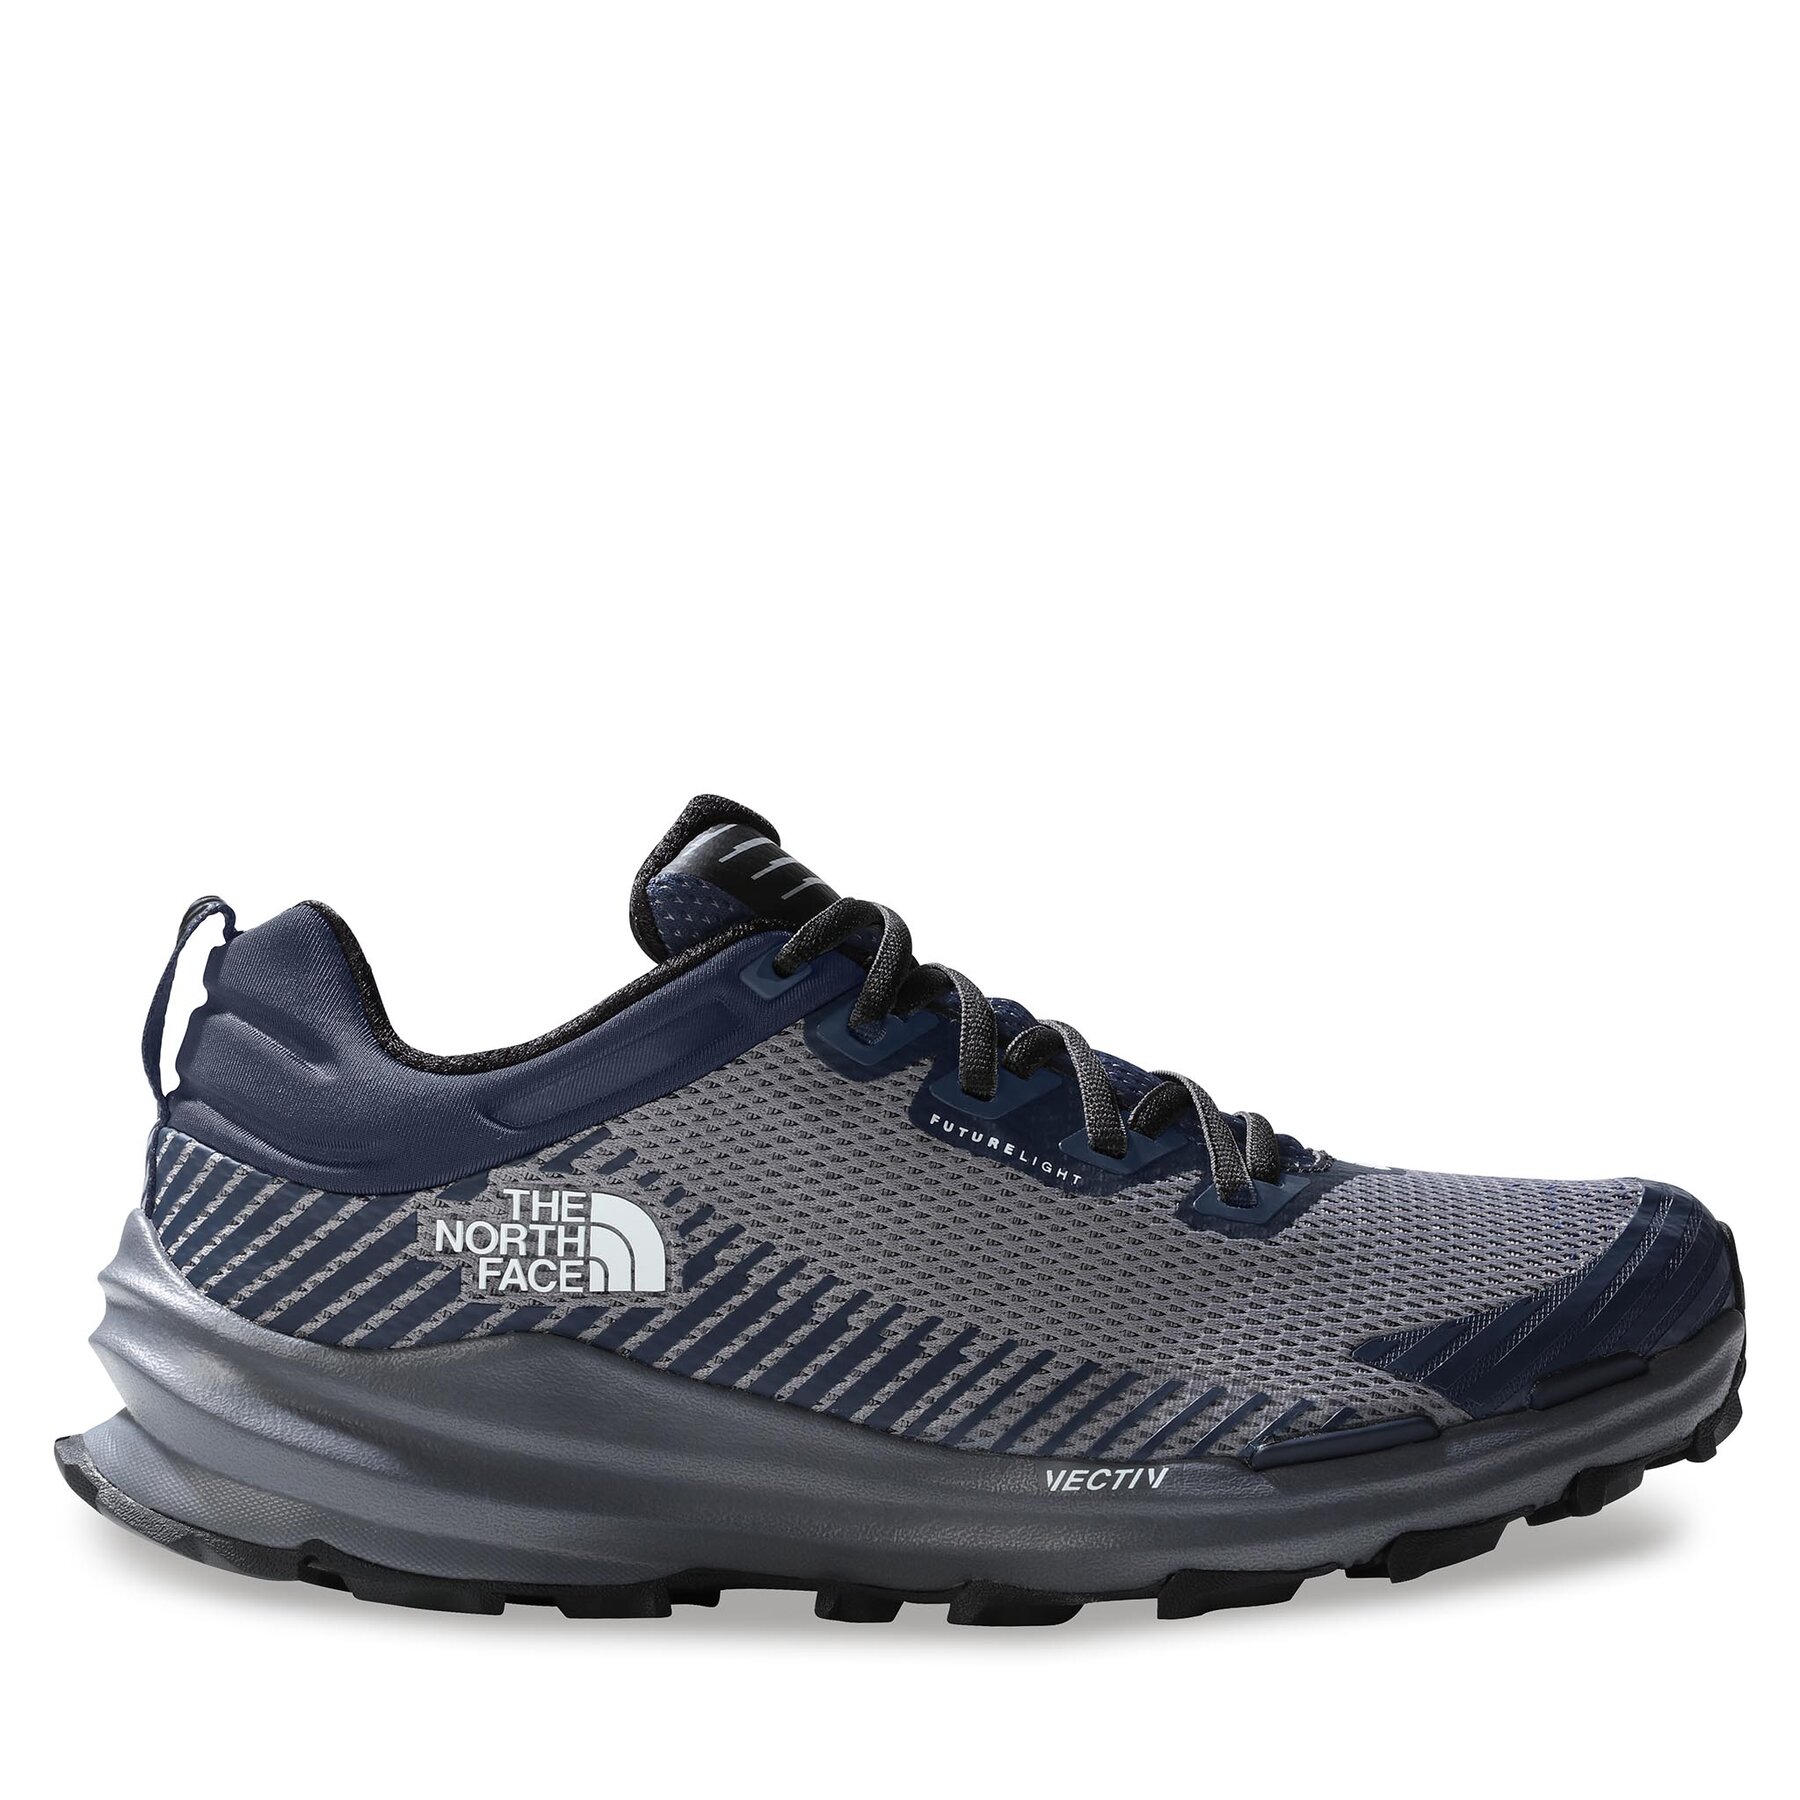 Schuhe The North Face Vectiv Fastpack Futurelight NF0A5JCYI8E1 Grey/Summit Navy von The North Face